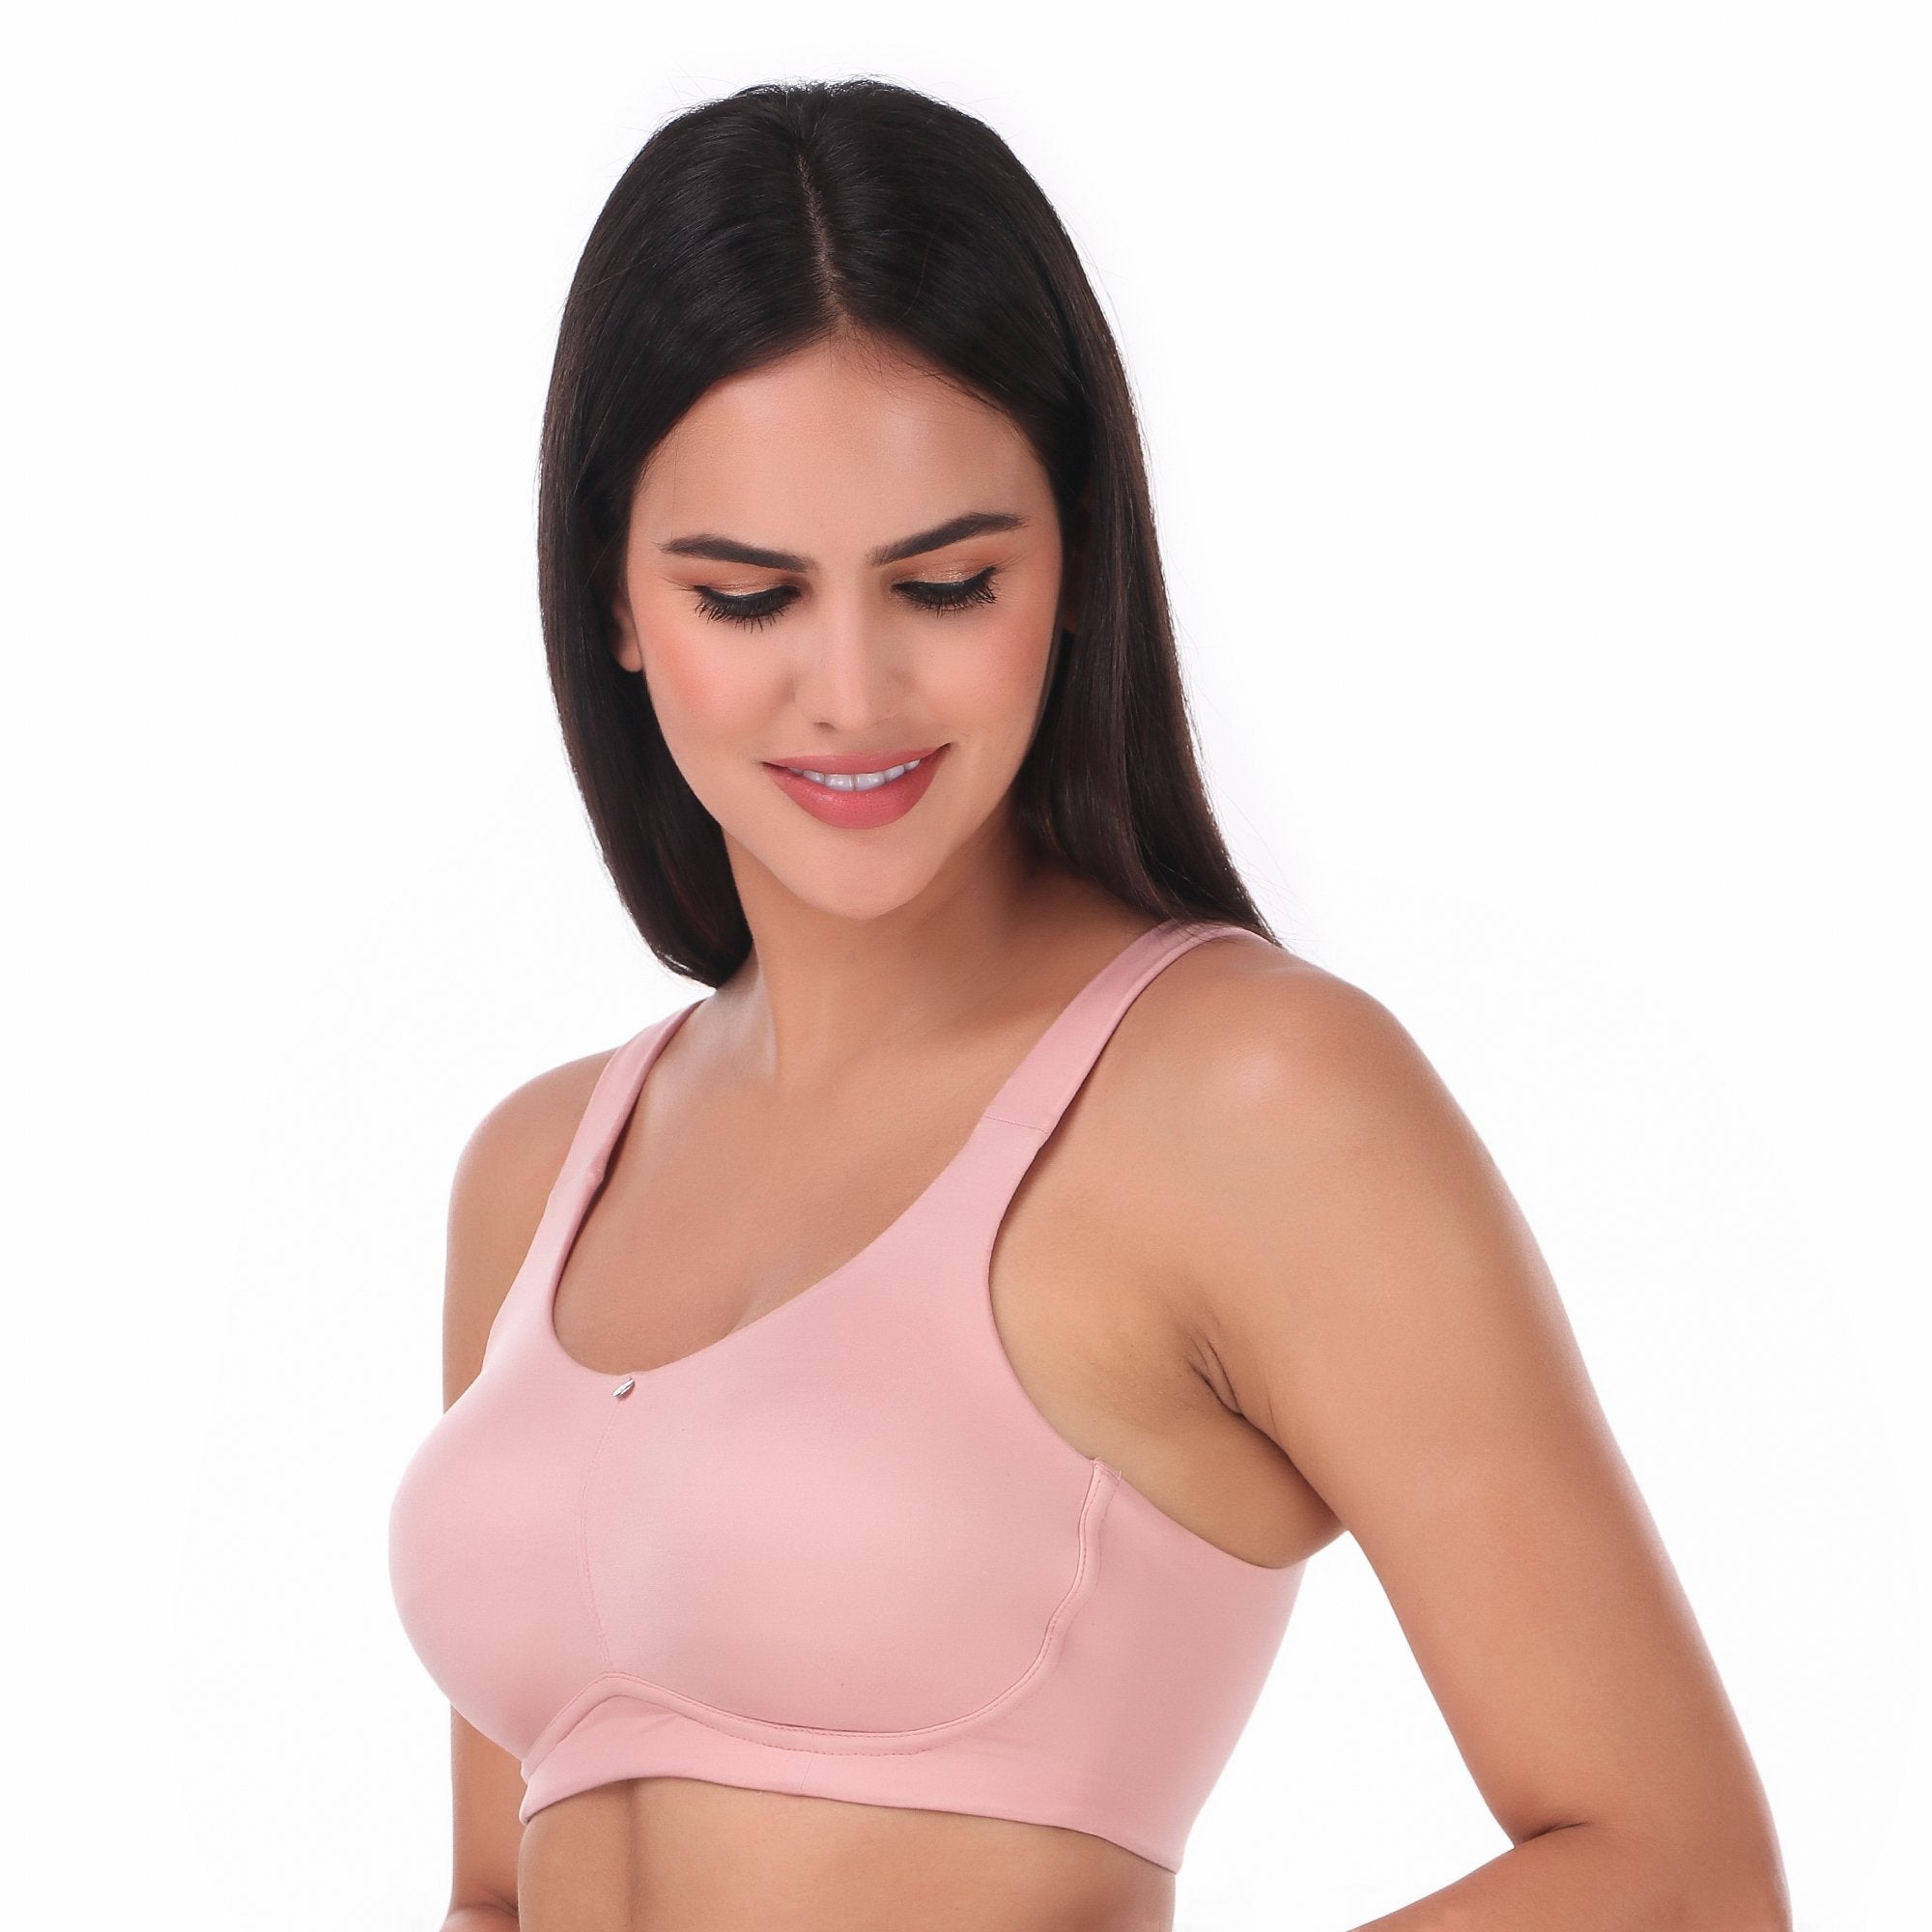 AMANTE-BRA77501 Cloudsoft Support Non-padded & Non-wired Bra